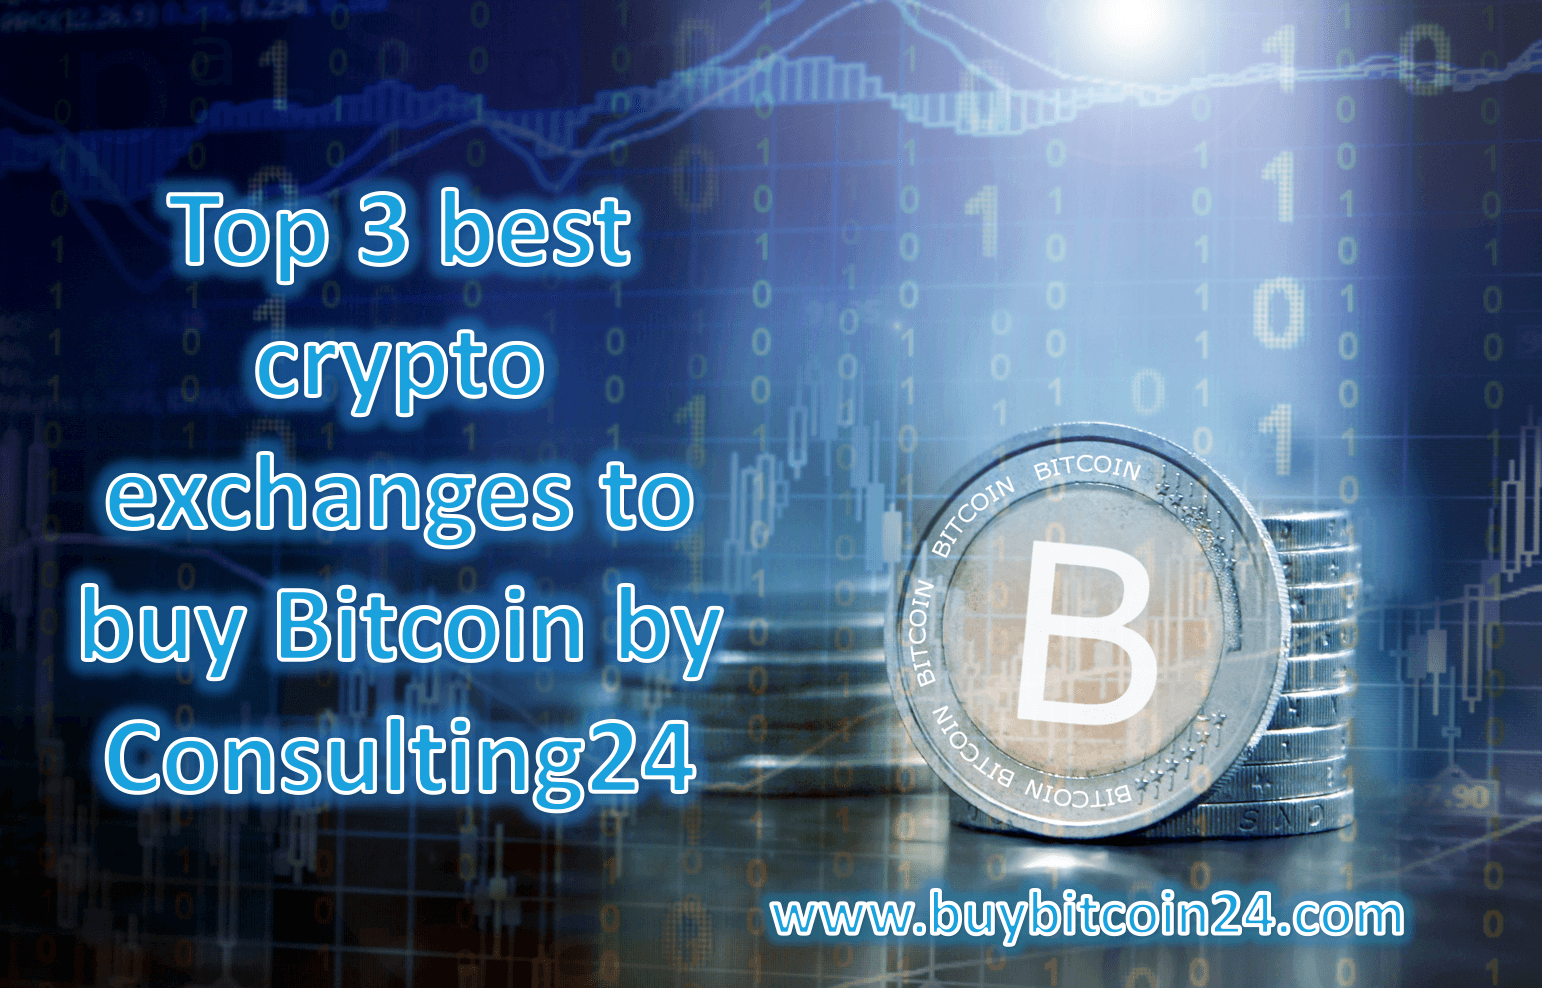 Consulting24 has launched BuyBitcoin24 domain to compare ...